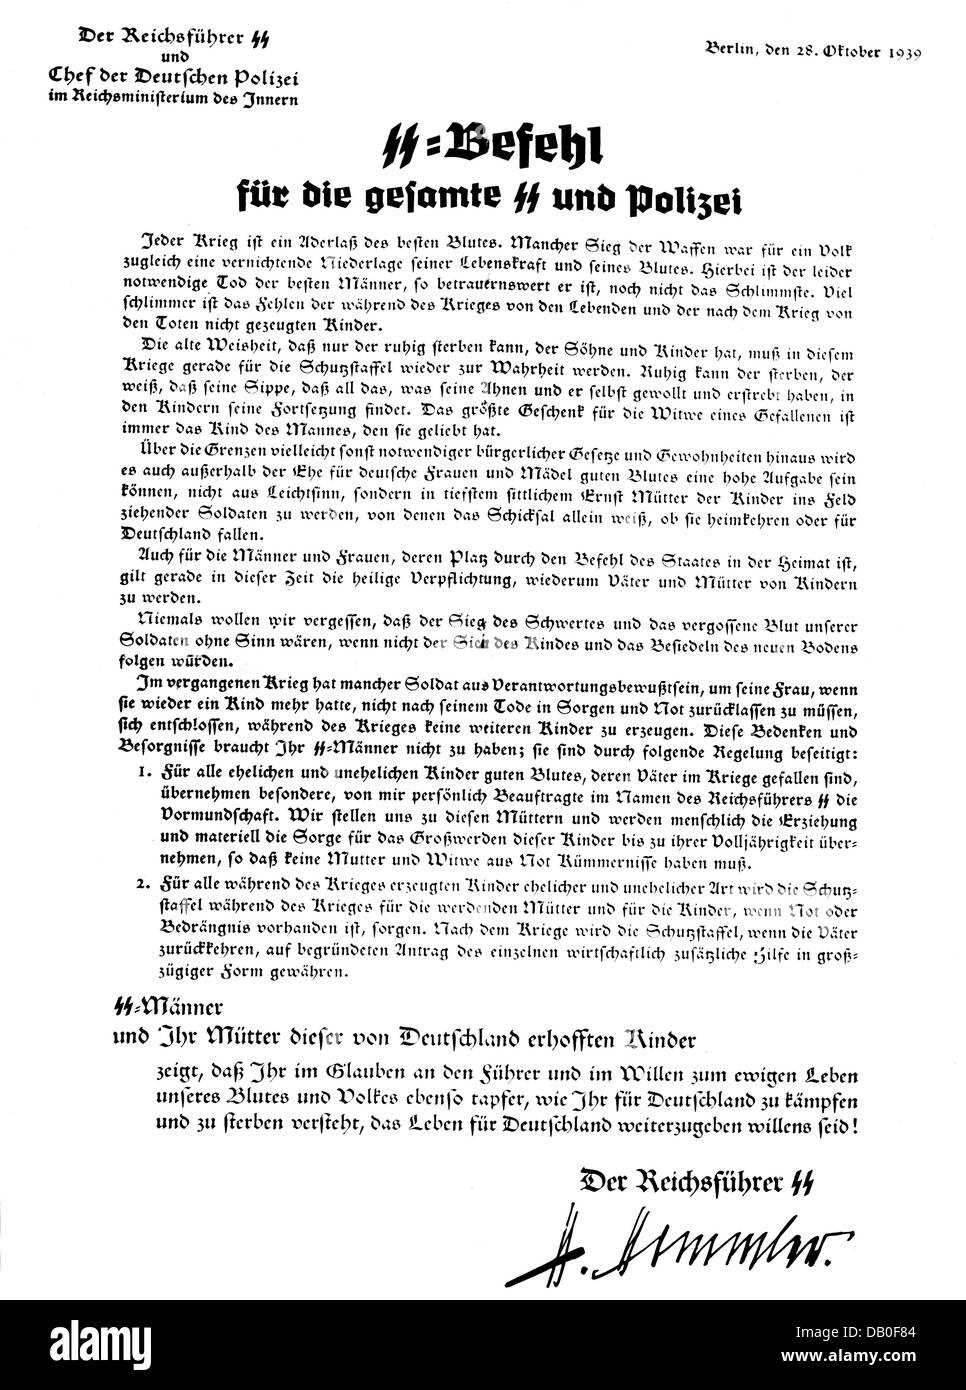 Nazism / National Socialism, organisations, Schutzstaffel (SS), secret decree of the Reichsfuehrer-SS Heinrich Himmler about the nursing of all conjugal and illegitimate children of 'good blood', Berlin, 28.10.1939, Additional-Rights-Clearences-Not Available Stock Photo